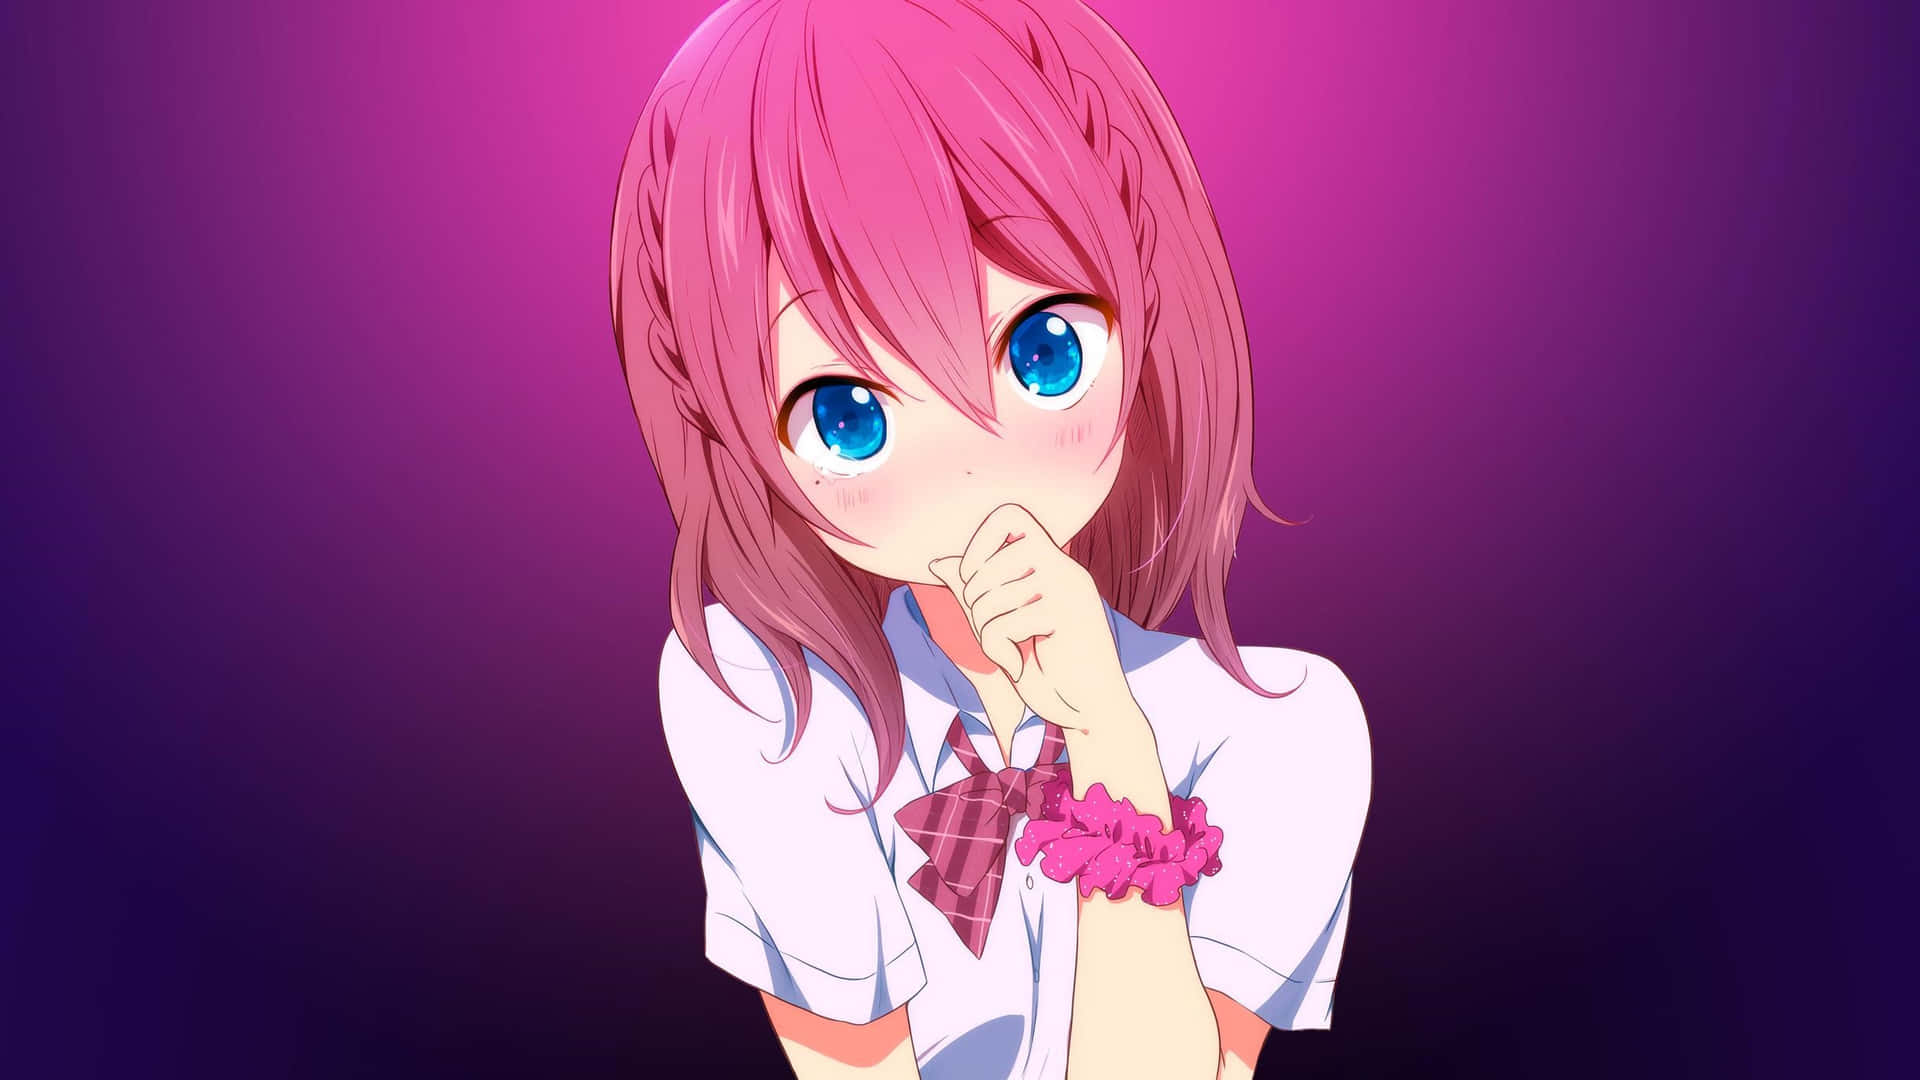 A cute girly girl with a pretty, pink outfit Wallpaper